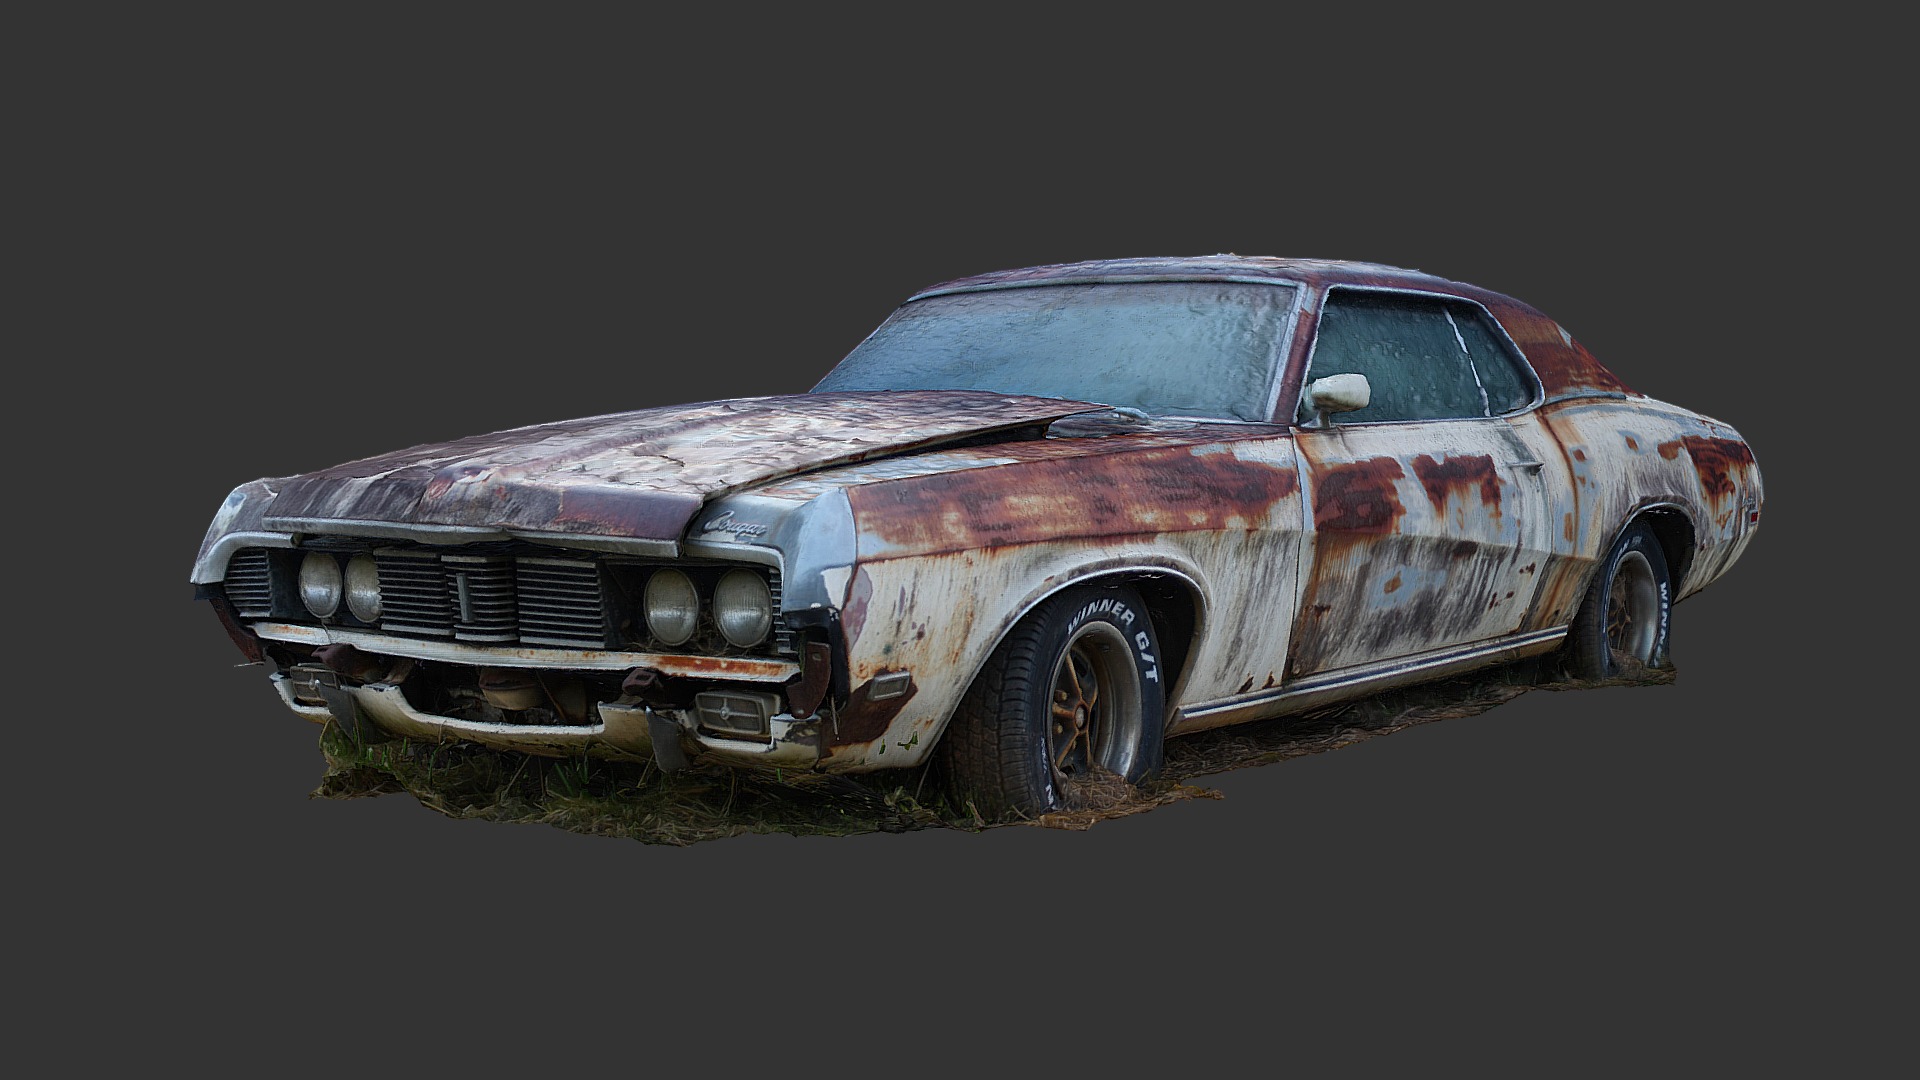 3D model Misfortunate Muscle Car (Raw Scan) - This is a 3D model of the Misfortunate Muscle Car (Raw Scan). The 3D model is about a red car with a dent in the front.